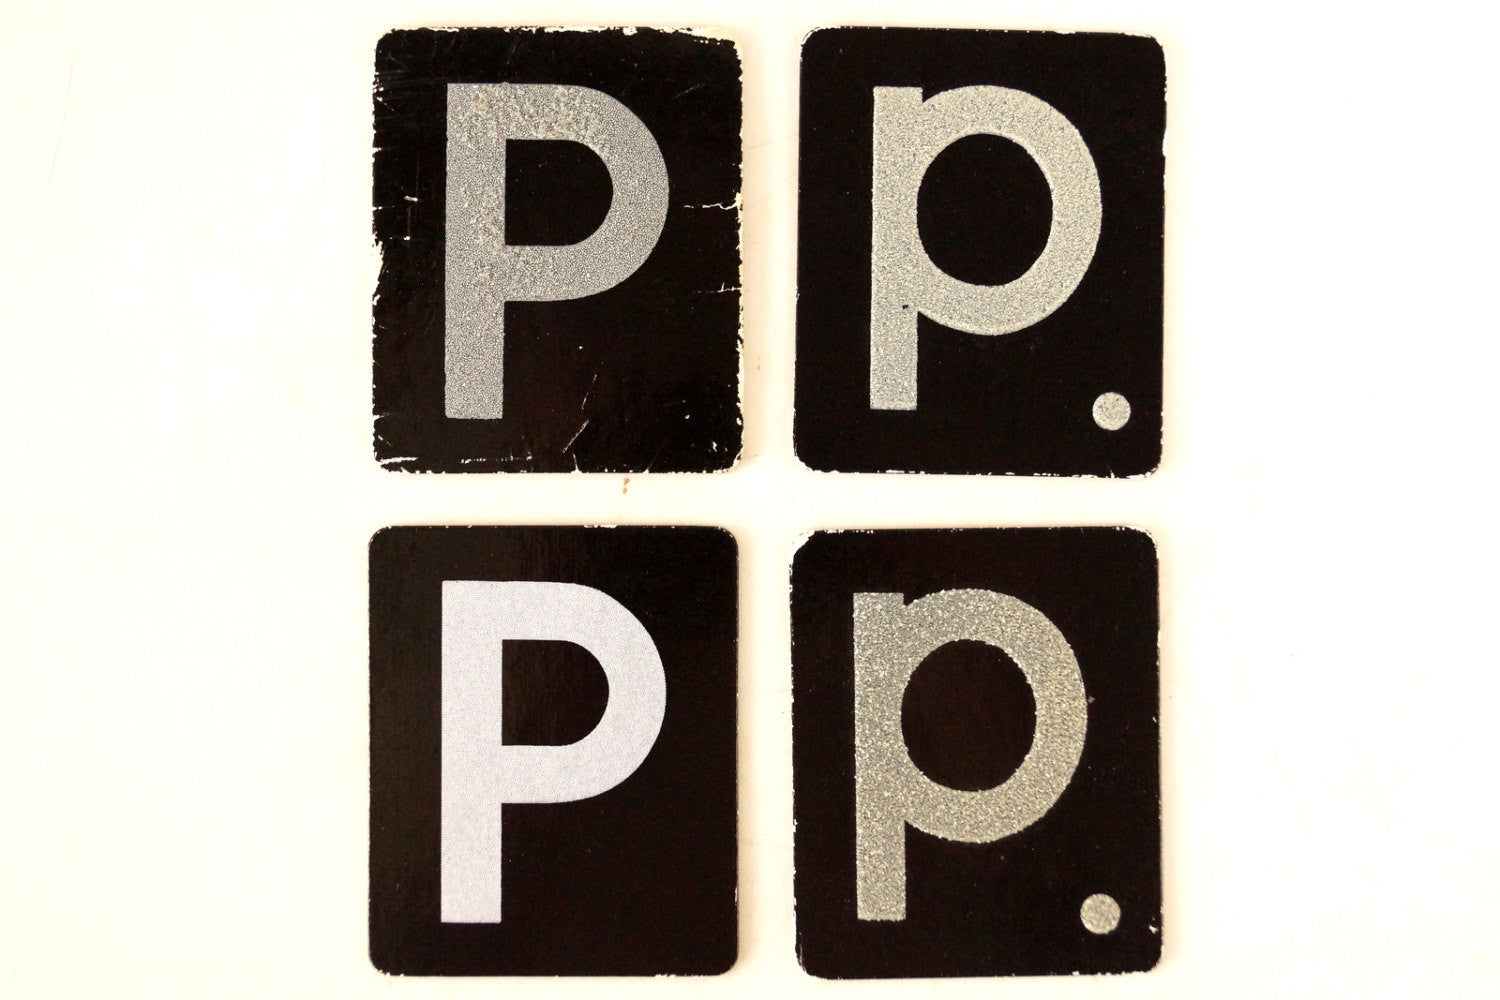 Vintage Alphabet Letter P Card with Textured Surface in Black